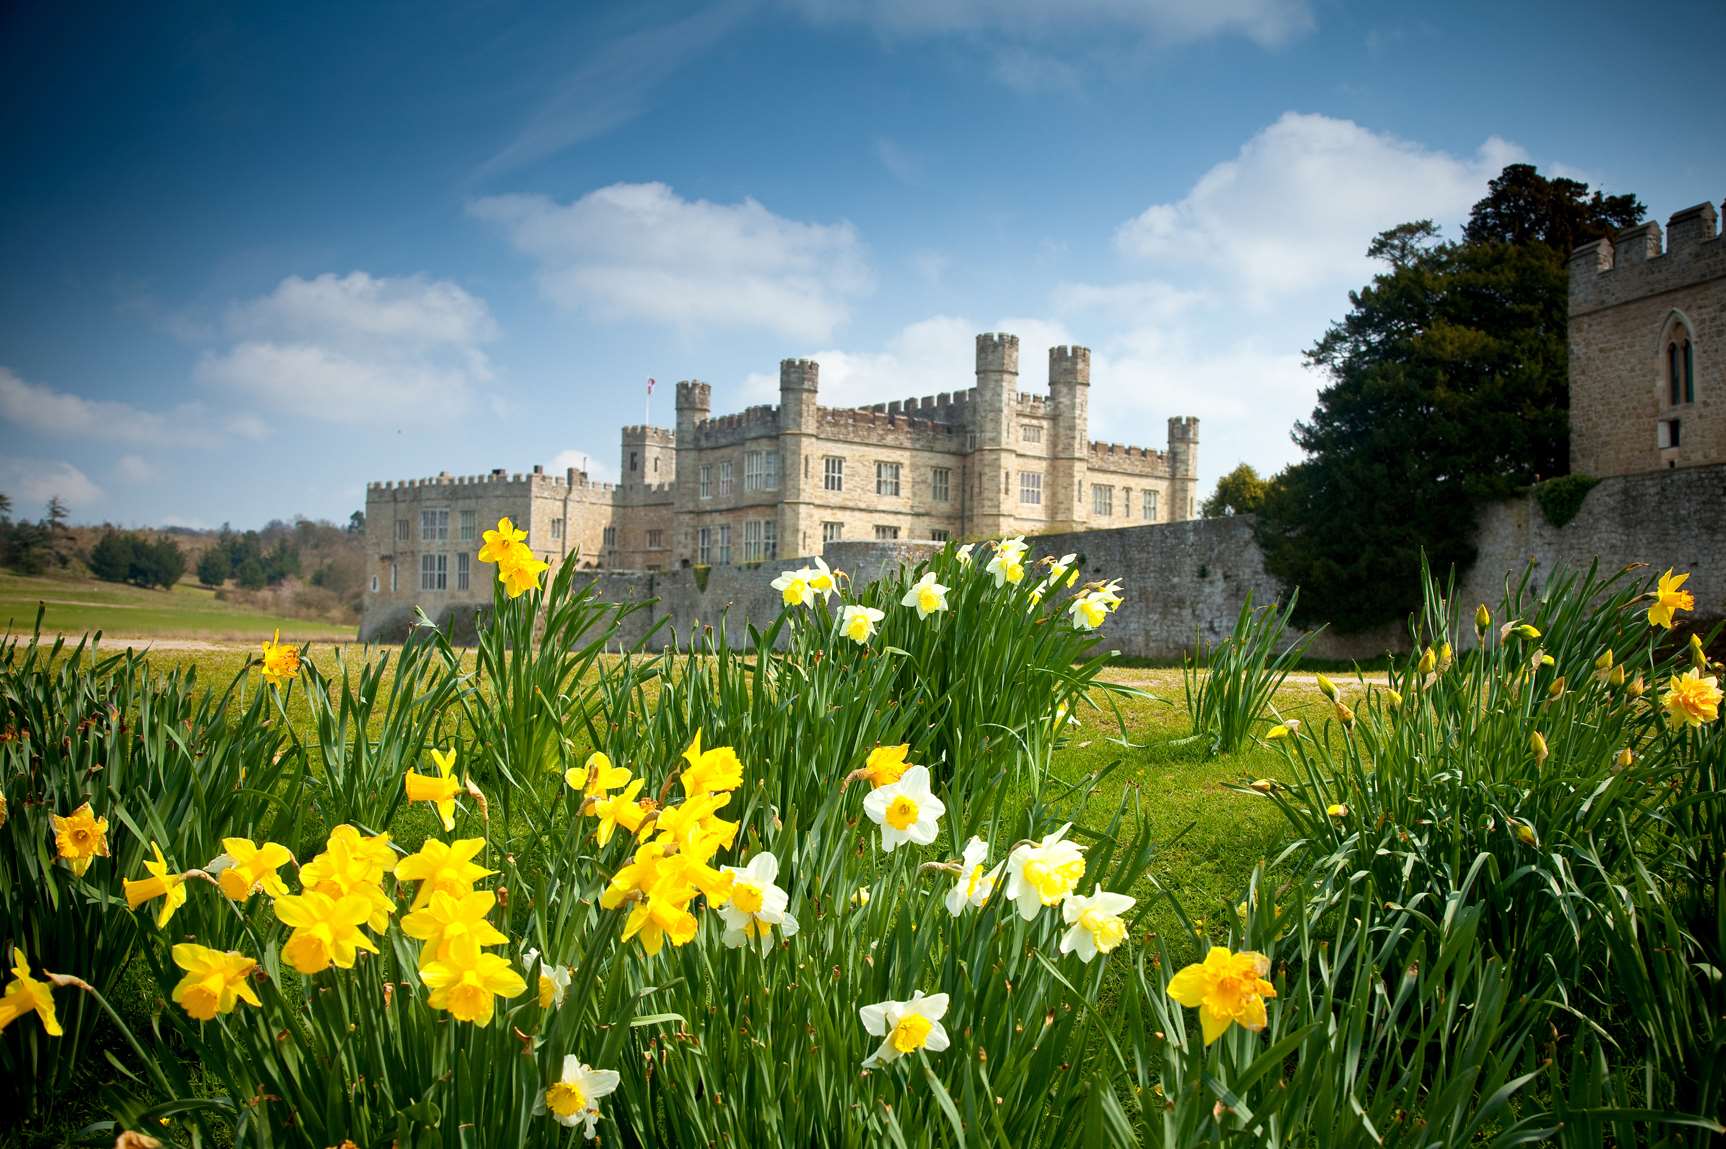 Leeds Castle is just off the M20 at Hollingbourne, near Maidstone